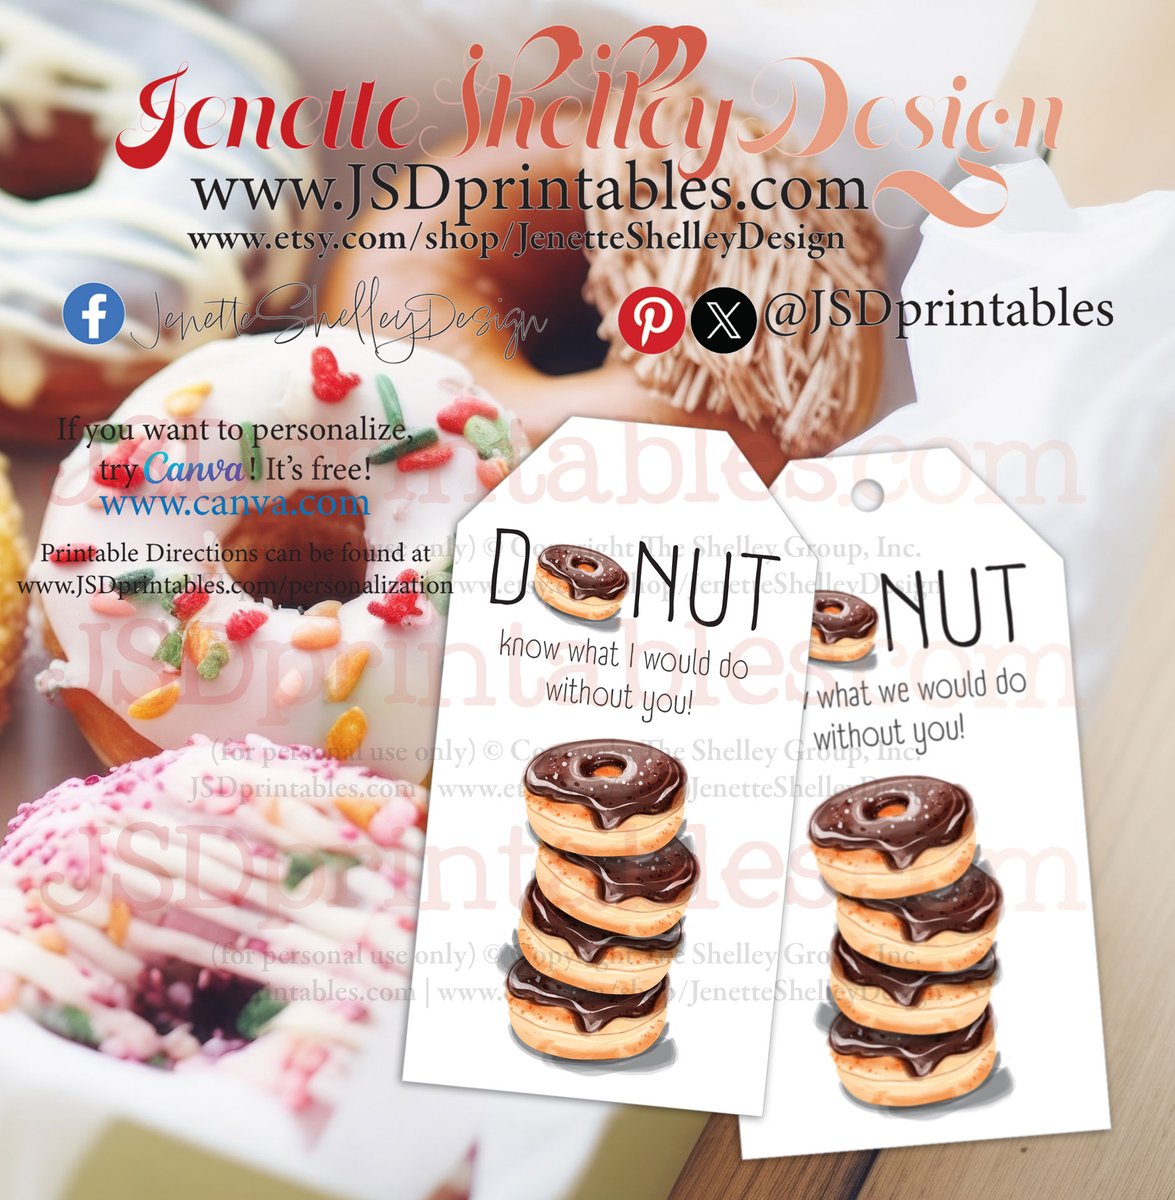 jsdprintables.com/product-page/d… With a fun donut-themed design and customizable message, you can add a personal touch to your gift-giving. @jsdprintables #printables #shopsmall #gifts #gifttags #donuts #doughnuts #doughnut #donutlover #donutshop #donutlove #sweets #donutday #breakfast